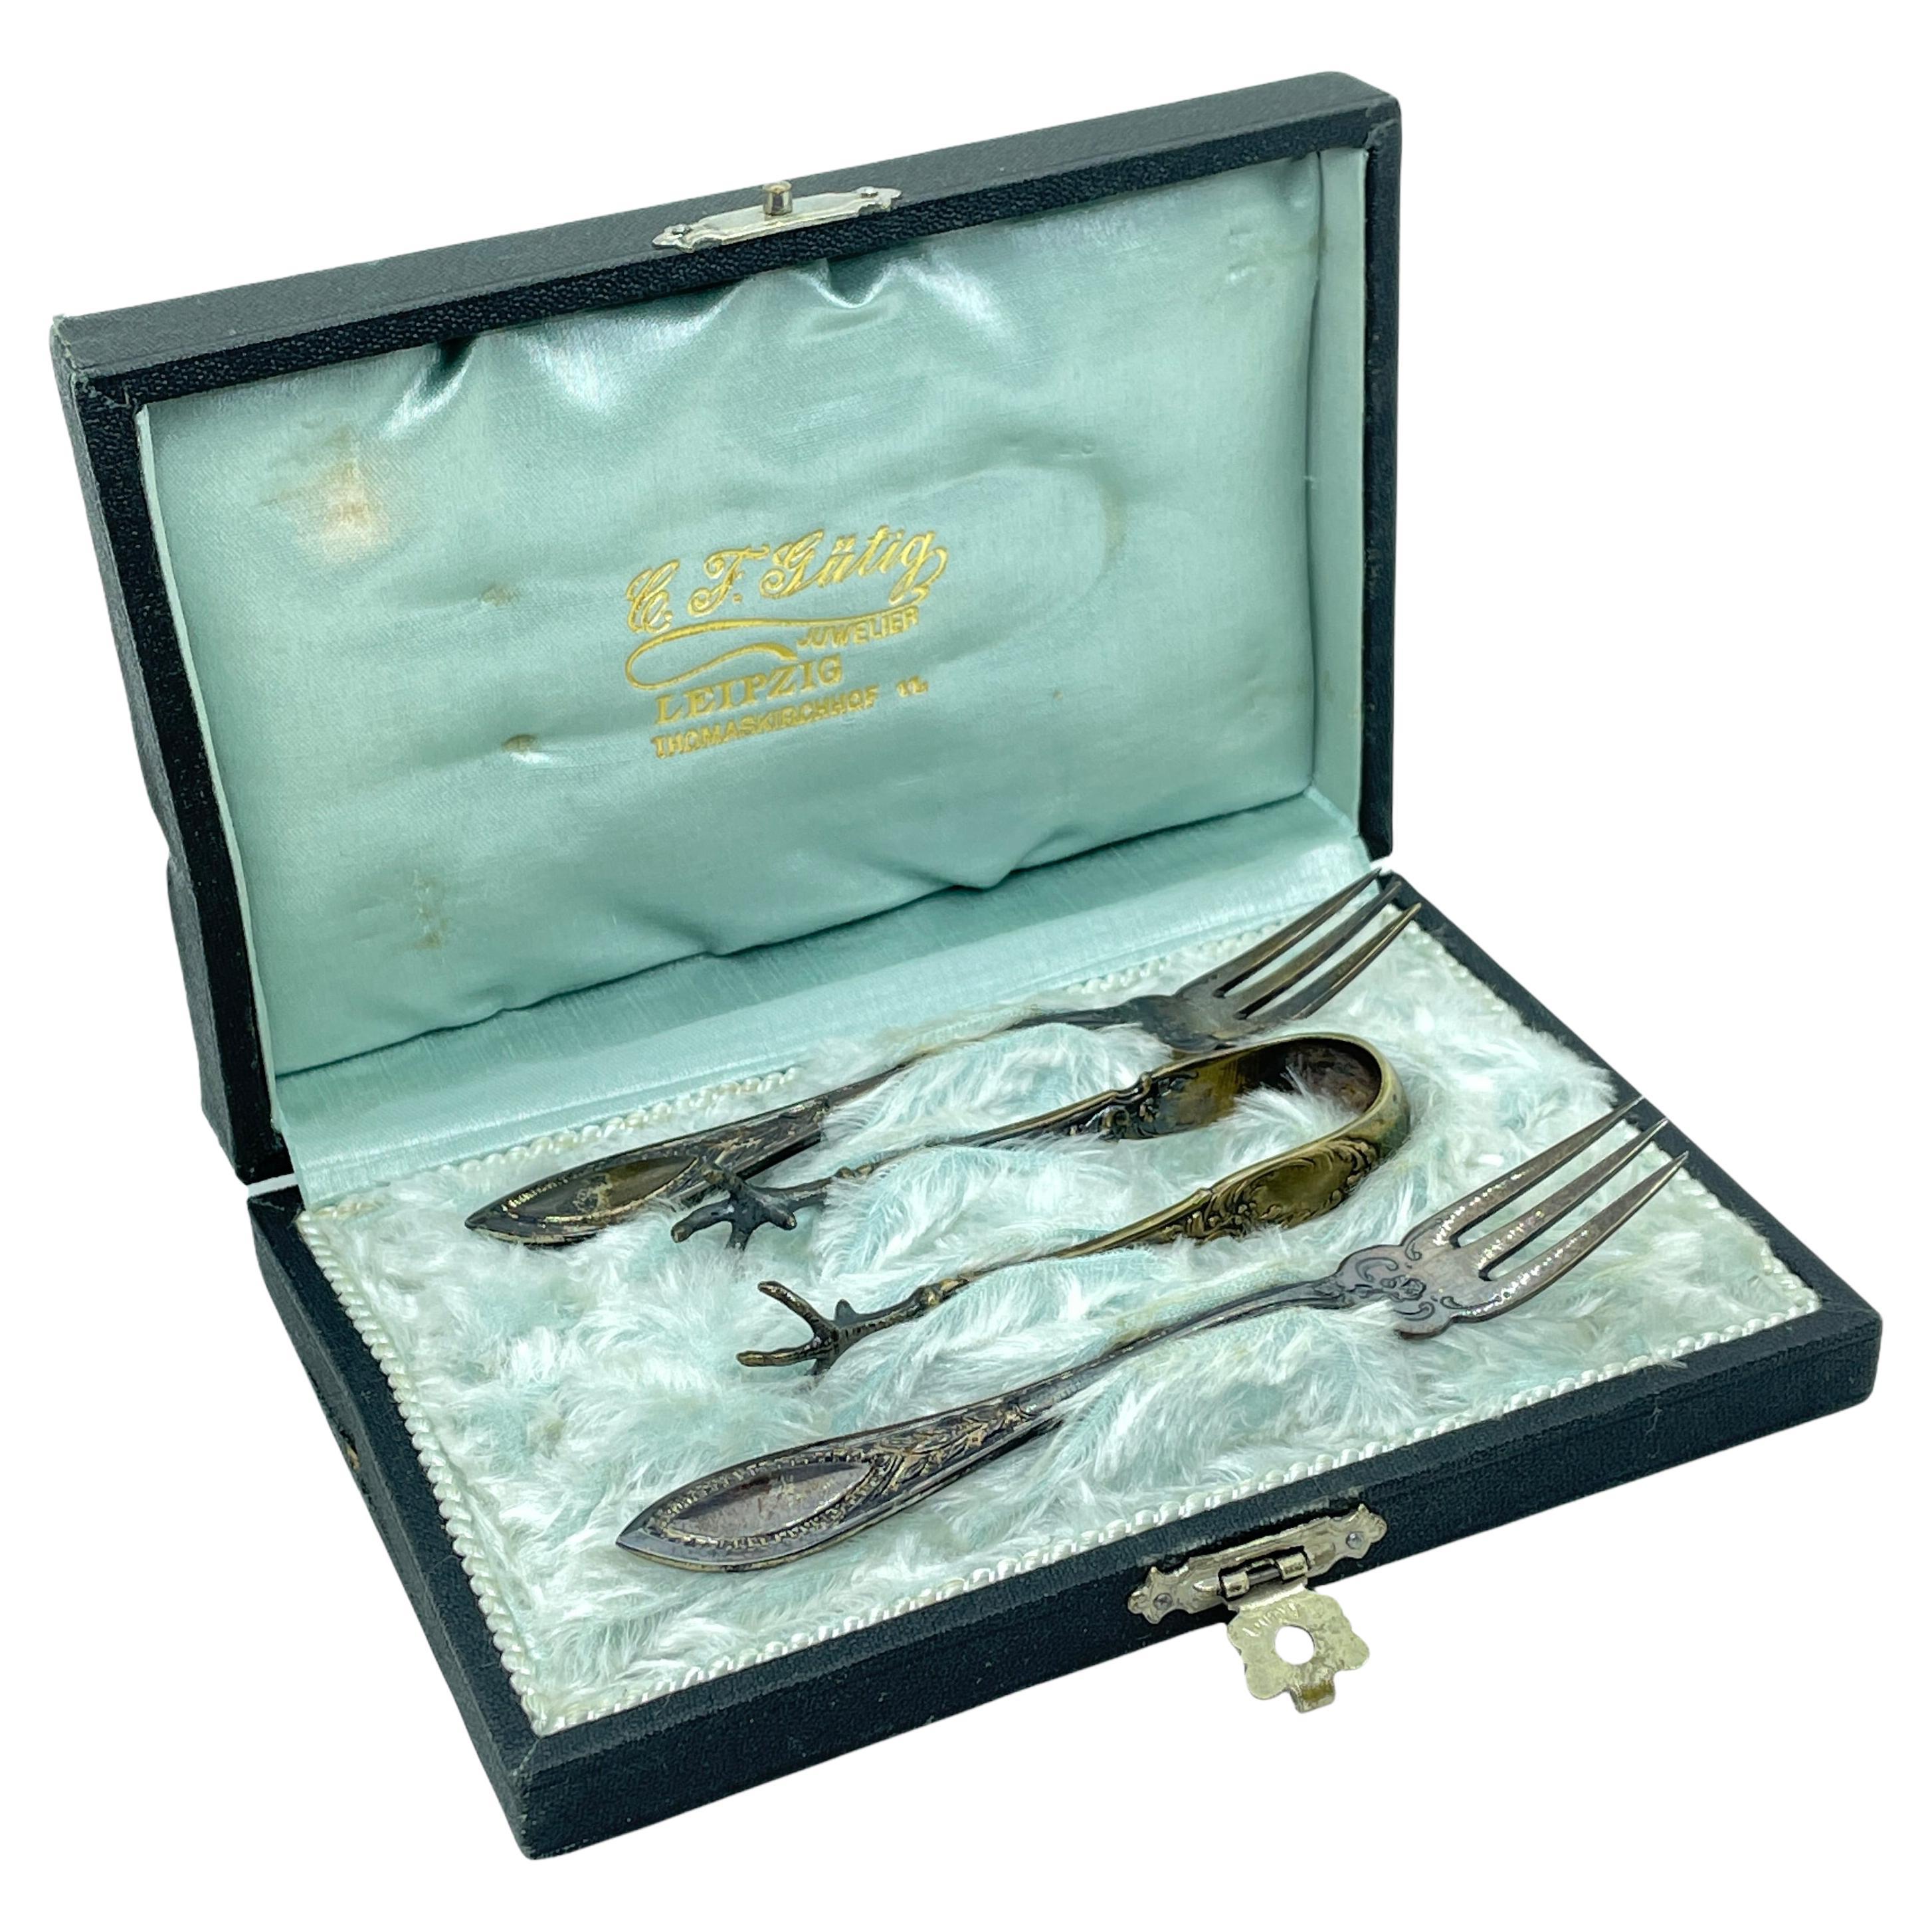 Two Fruit Forks and Sugar Tongs in Case, Antique Germany, c. 1900 Silver 800 For Sale